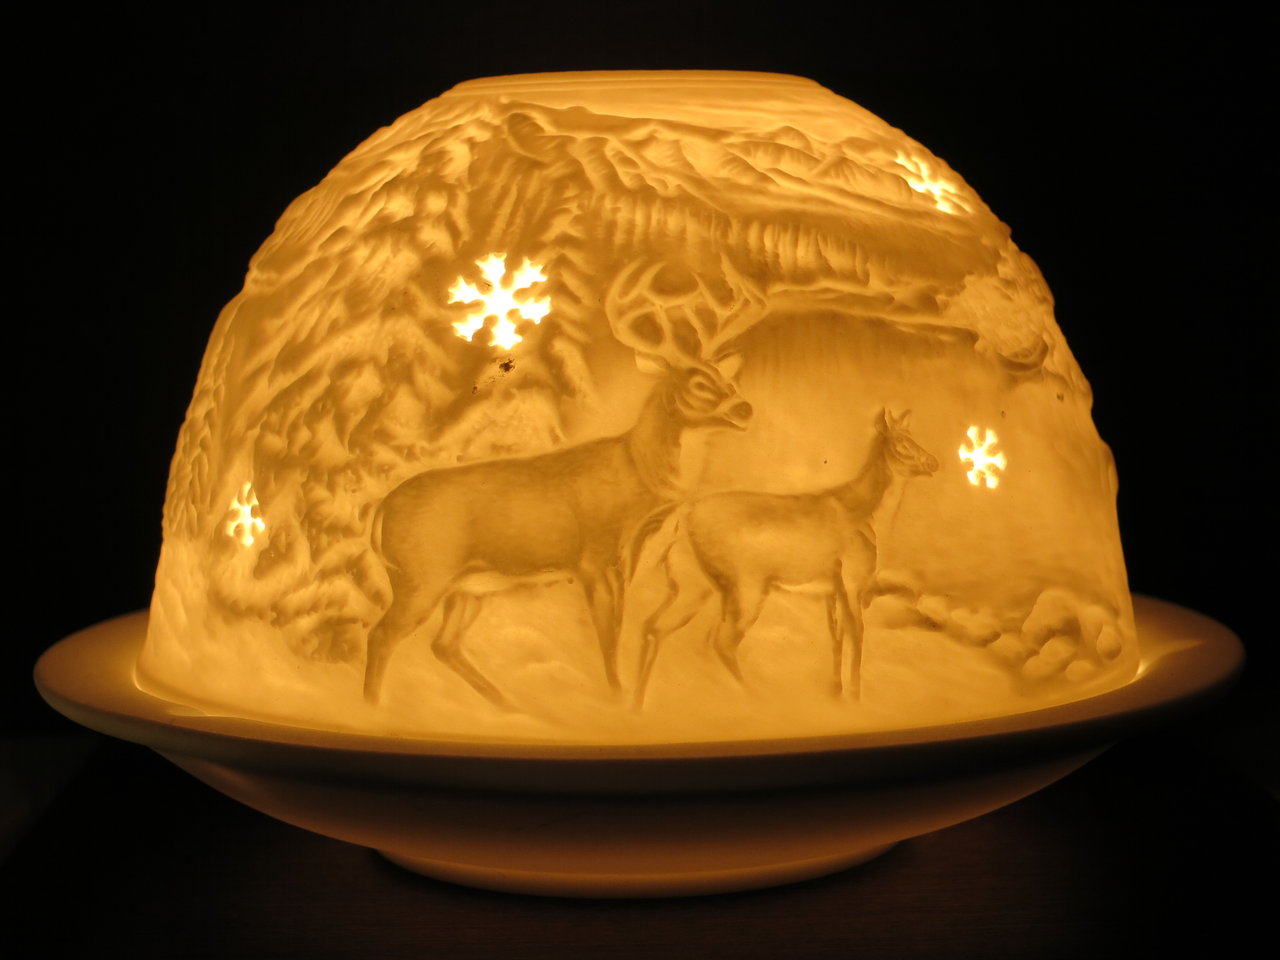 Stag and Deer German Ceramic Tea Light Dome Candle